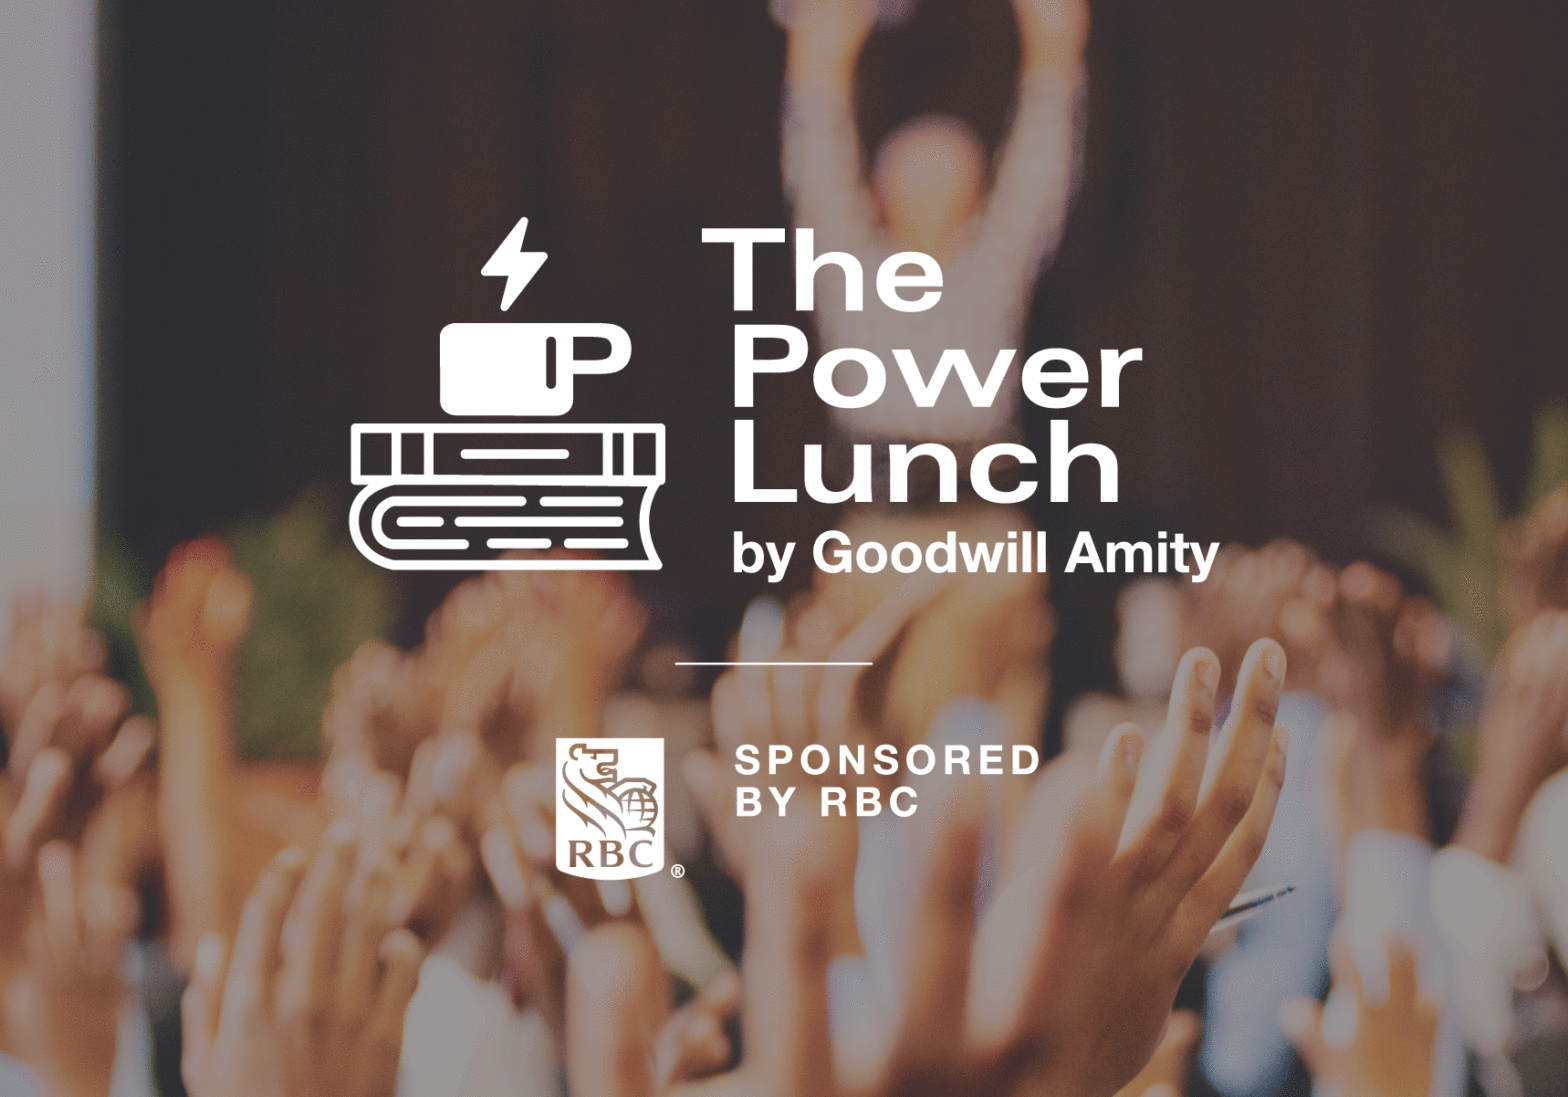 Image of a crowd of people at an event raising their hands towards a guest speaker with the logo "The Power Lunch" stamped over top